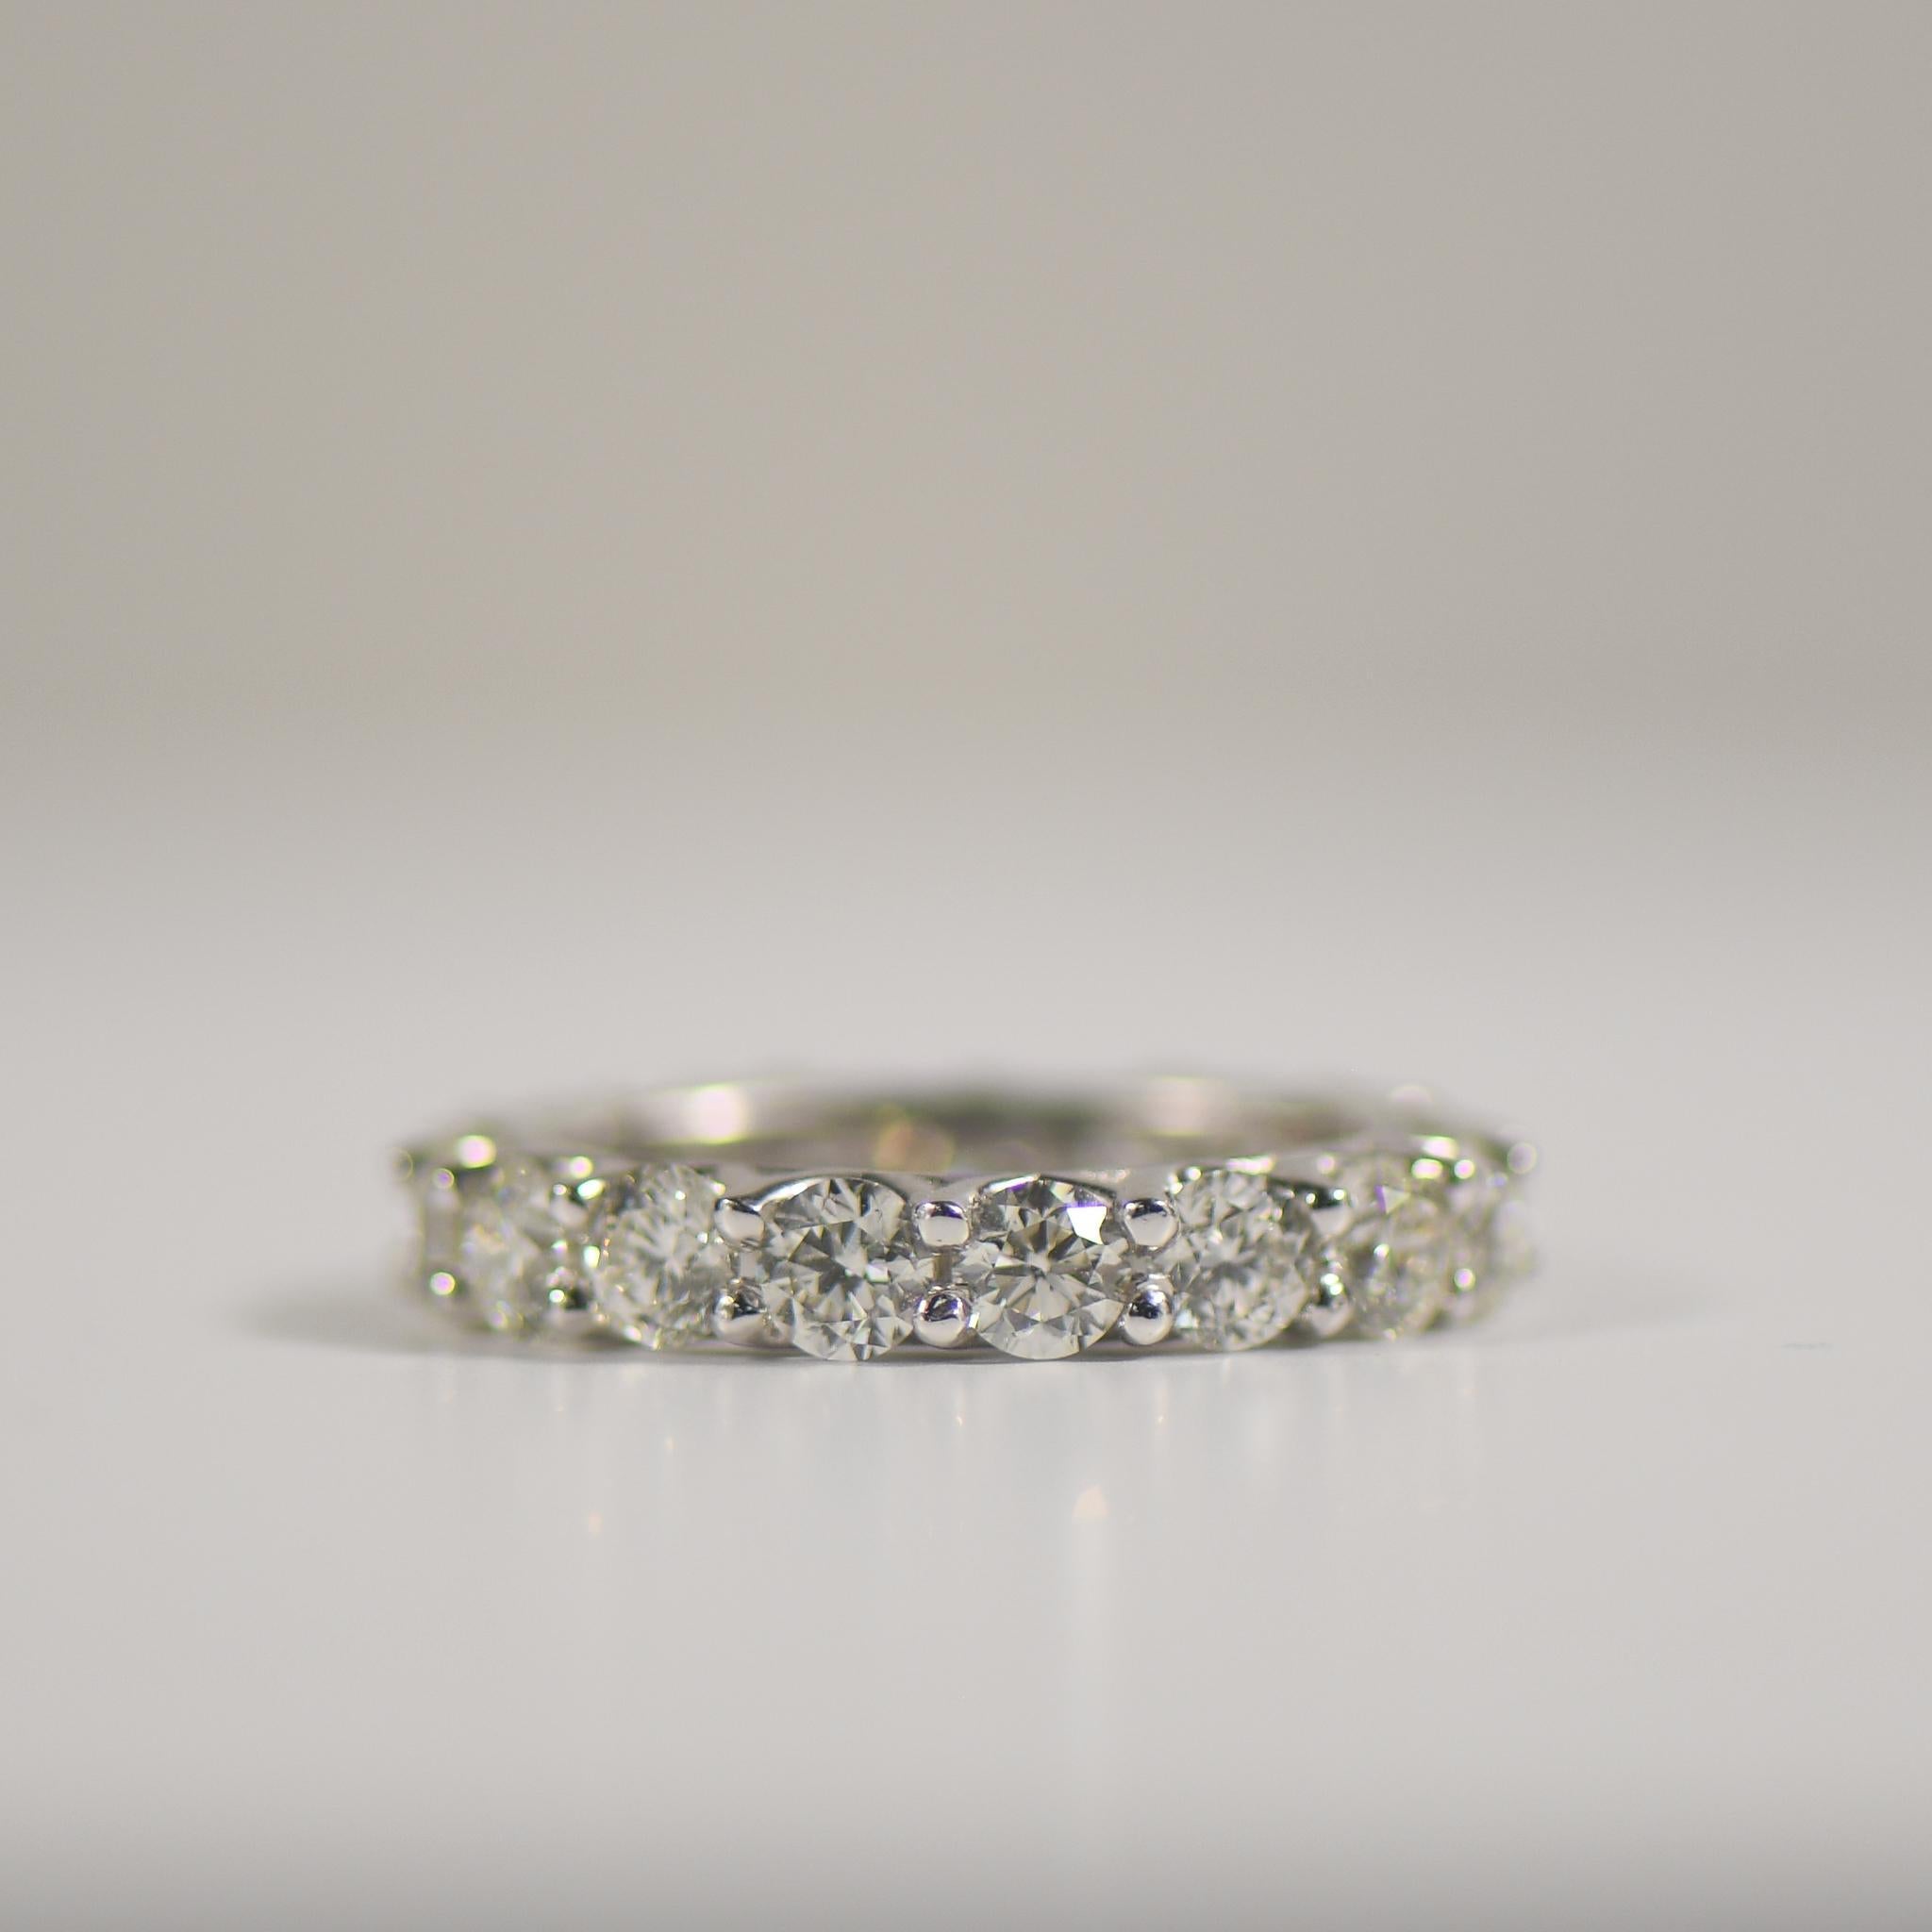 4.25ctw Round Brilliant Cut Diamond Eternity Band in 18K White Gold Size 6.75 In Good Condition For Sale In Addison, TX